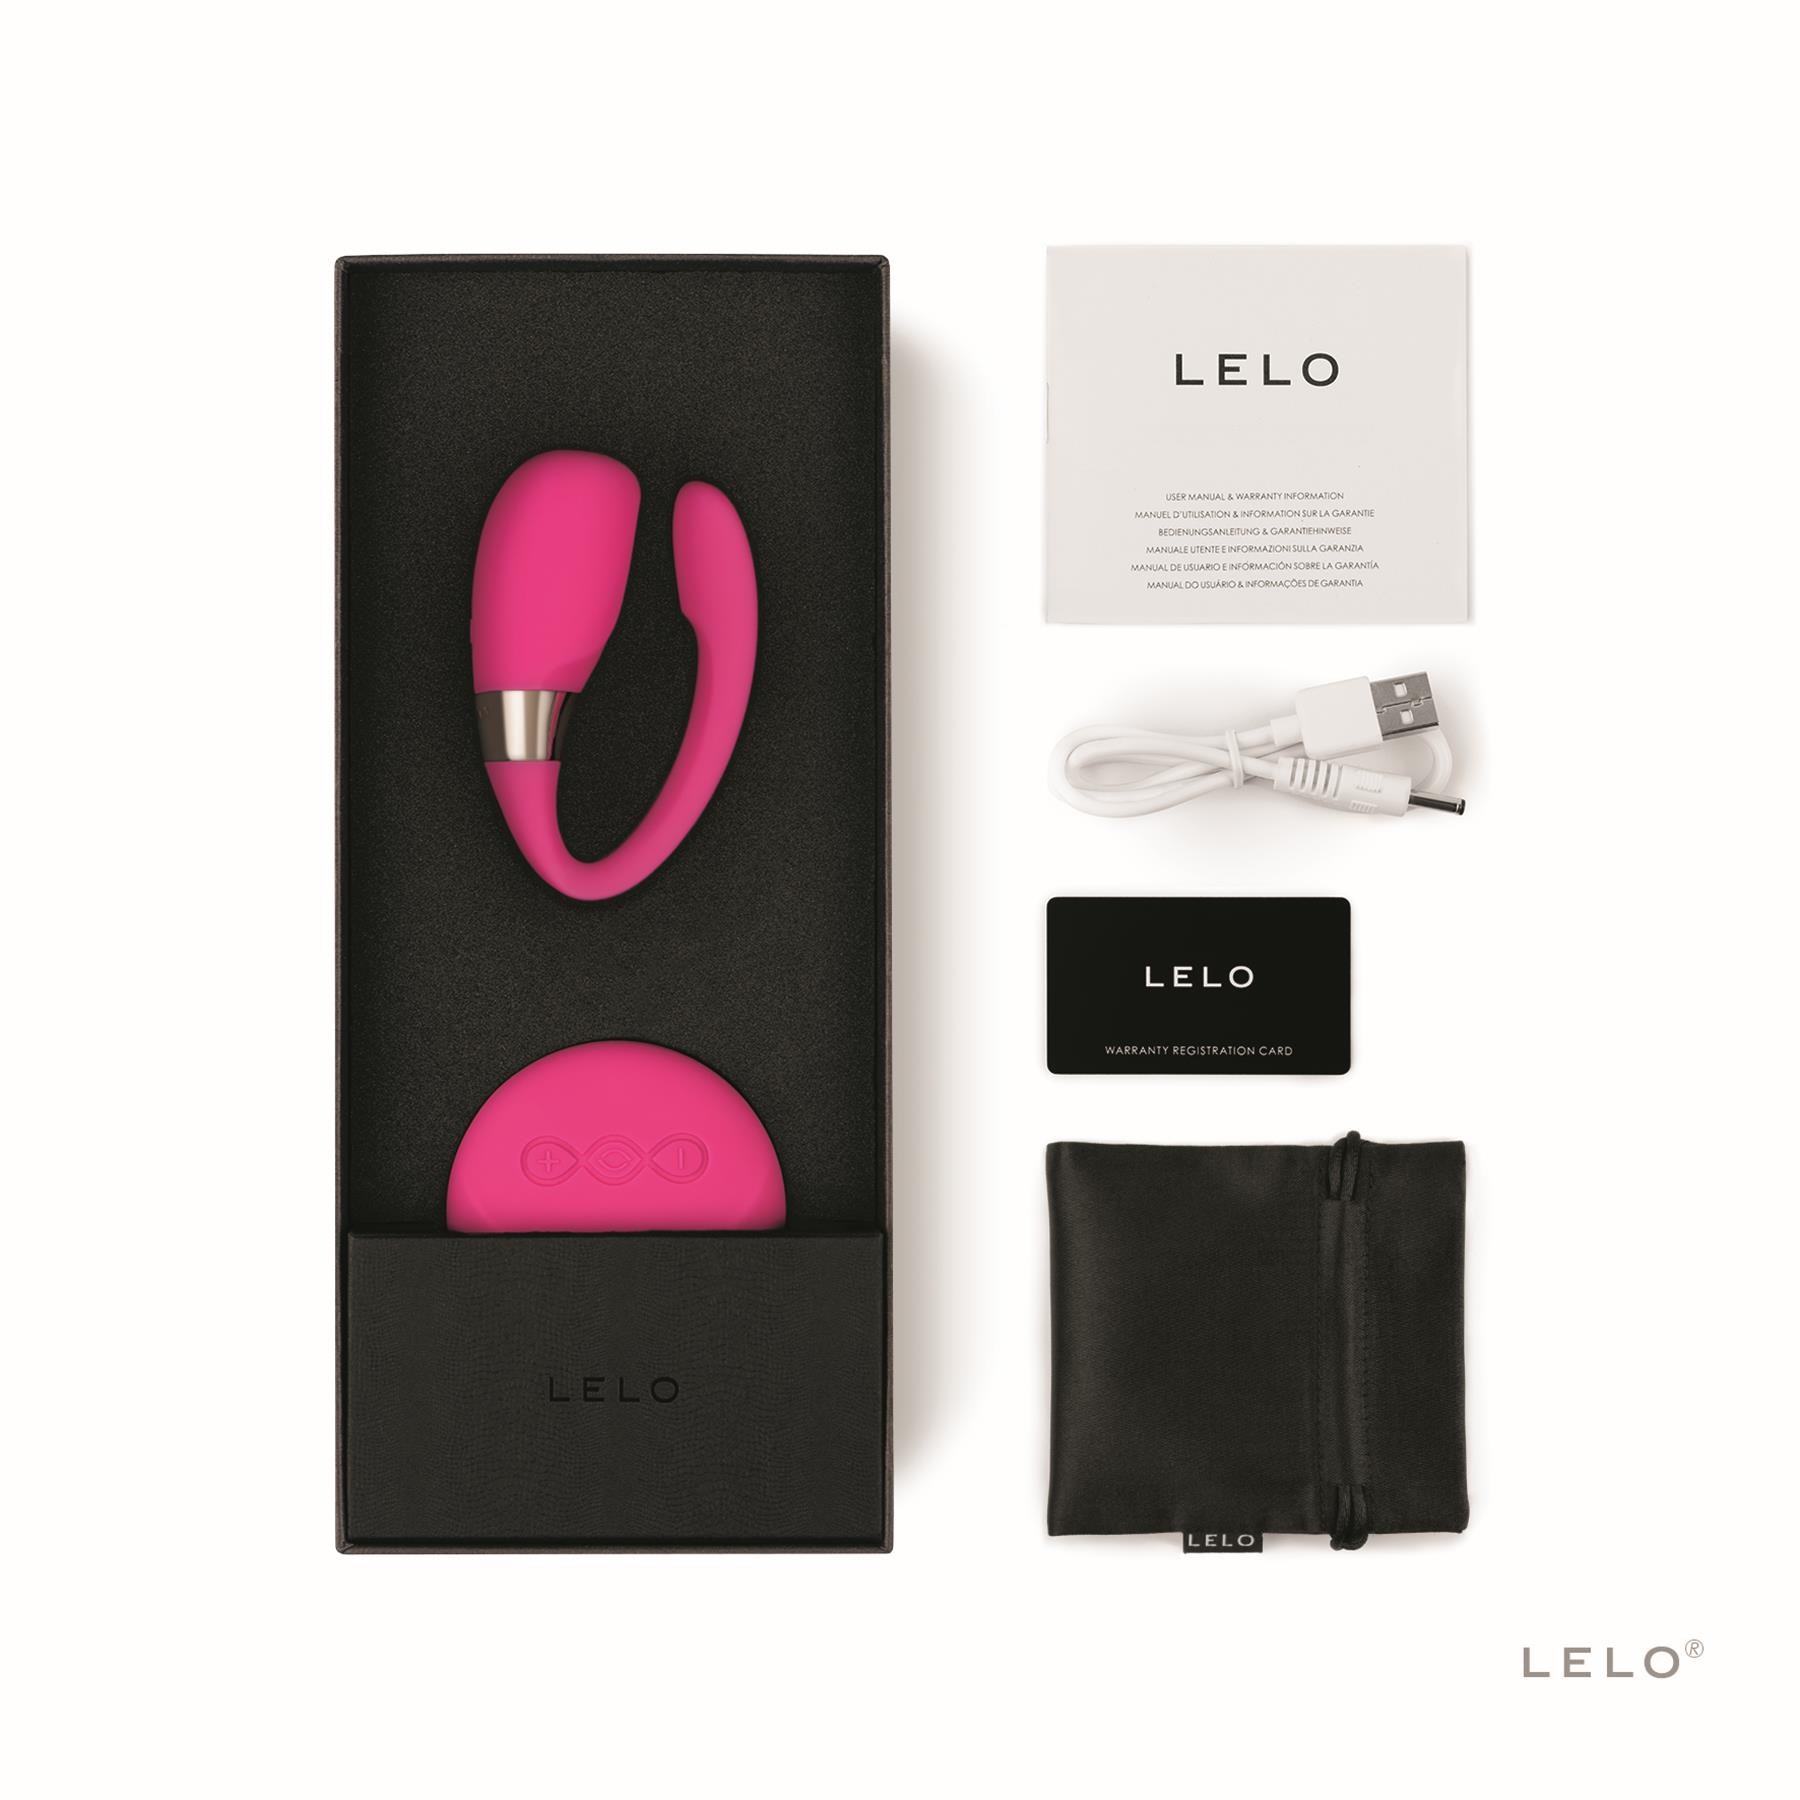 Lelo Tiani 3 Remote Control Couples Massager Product Shot with all components included in box